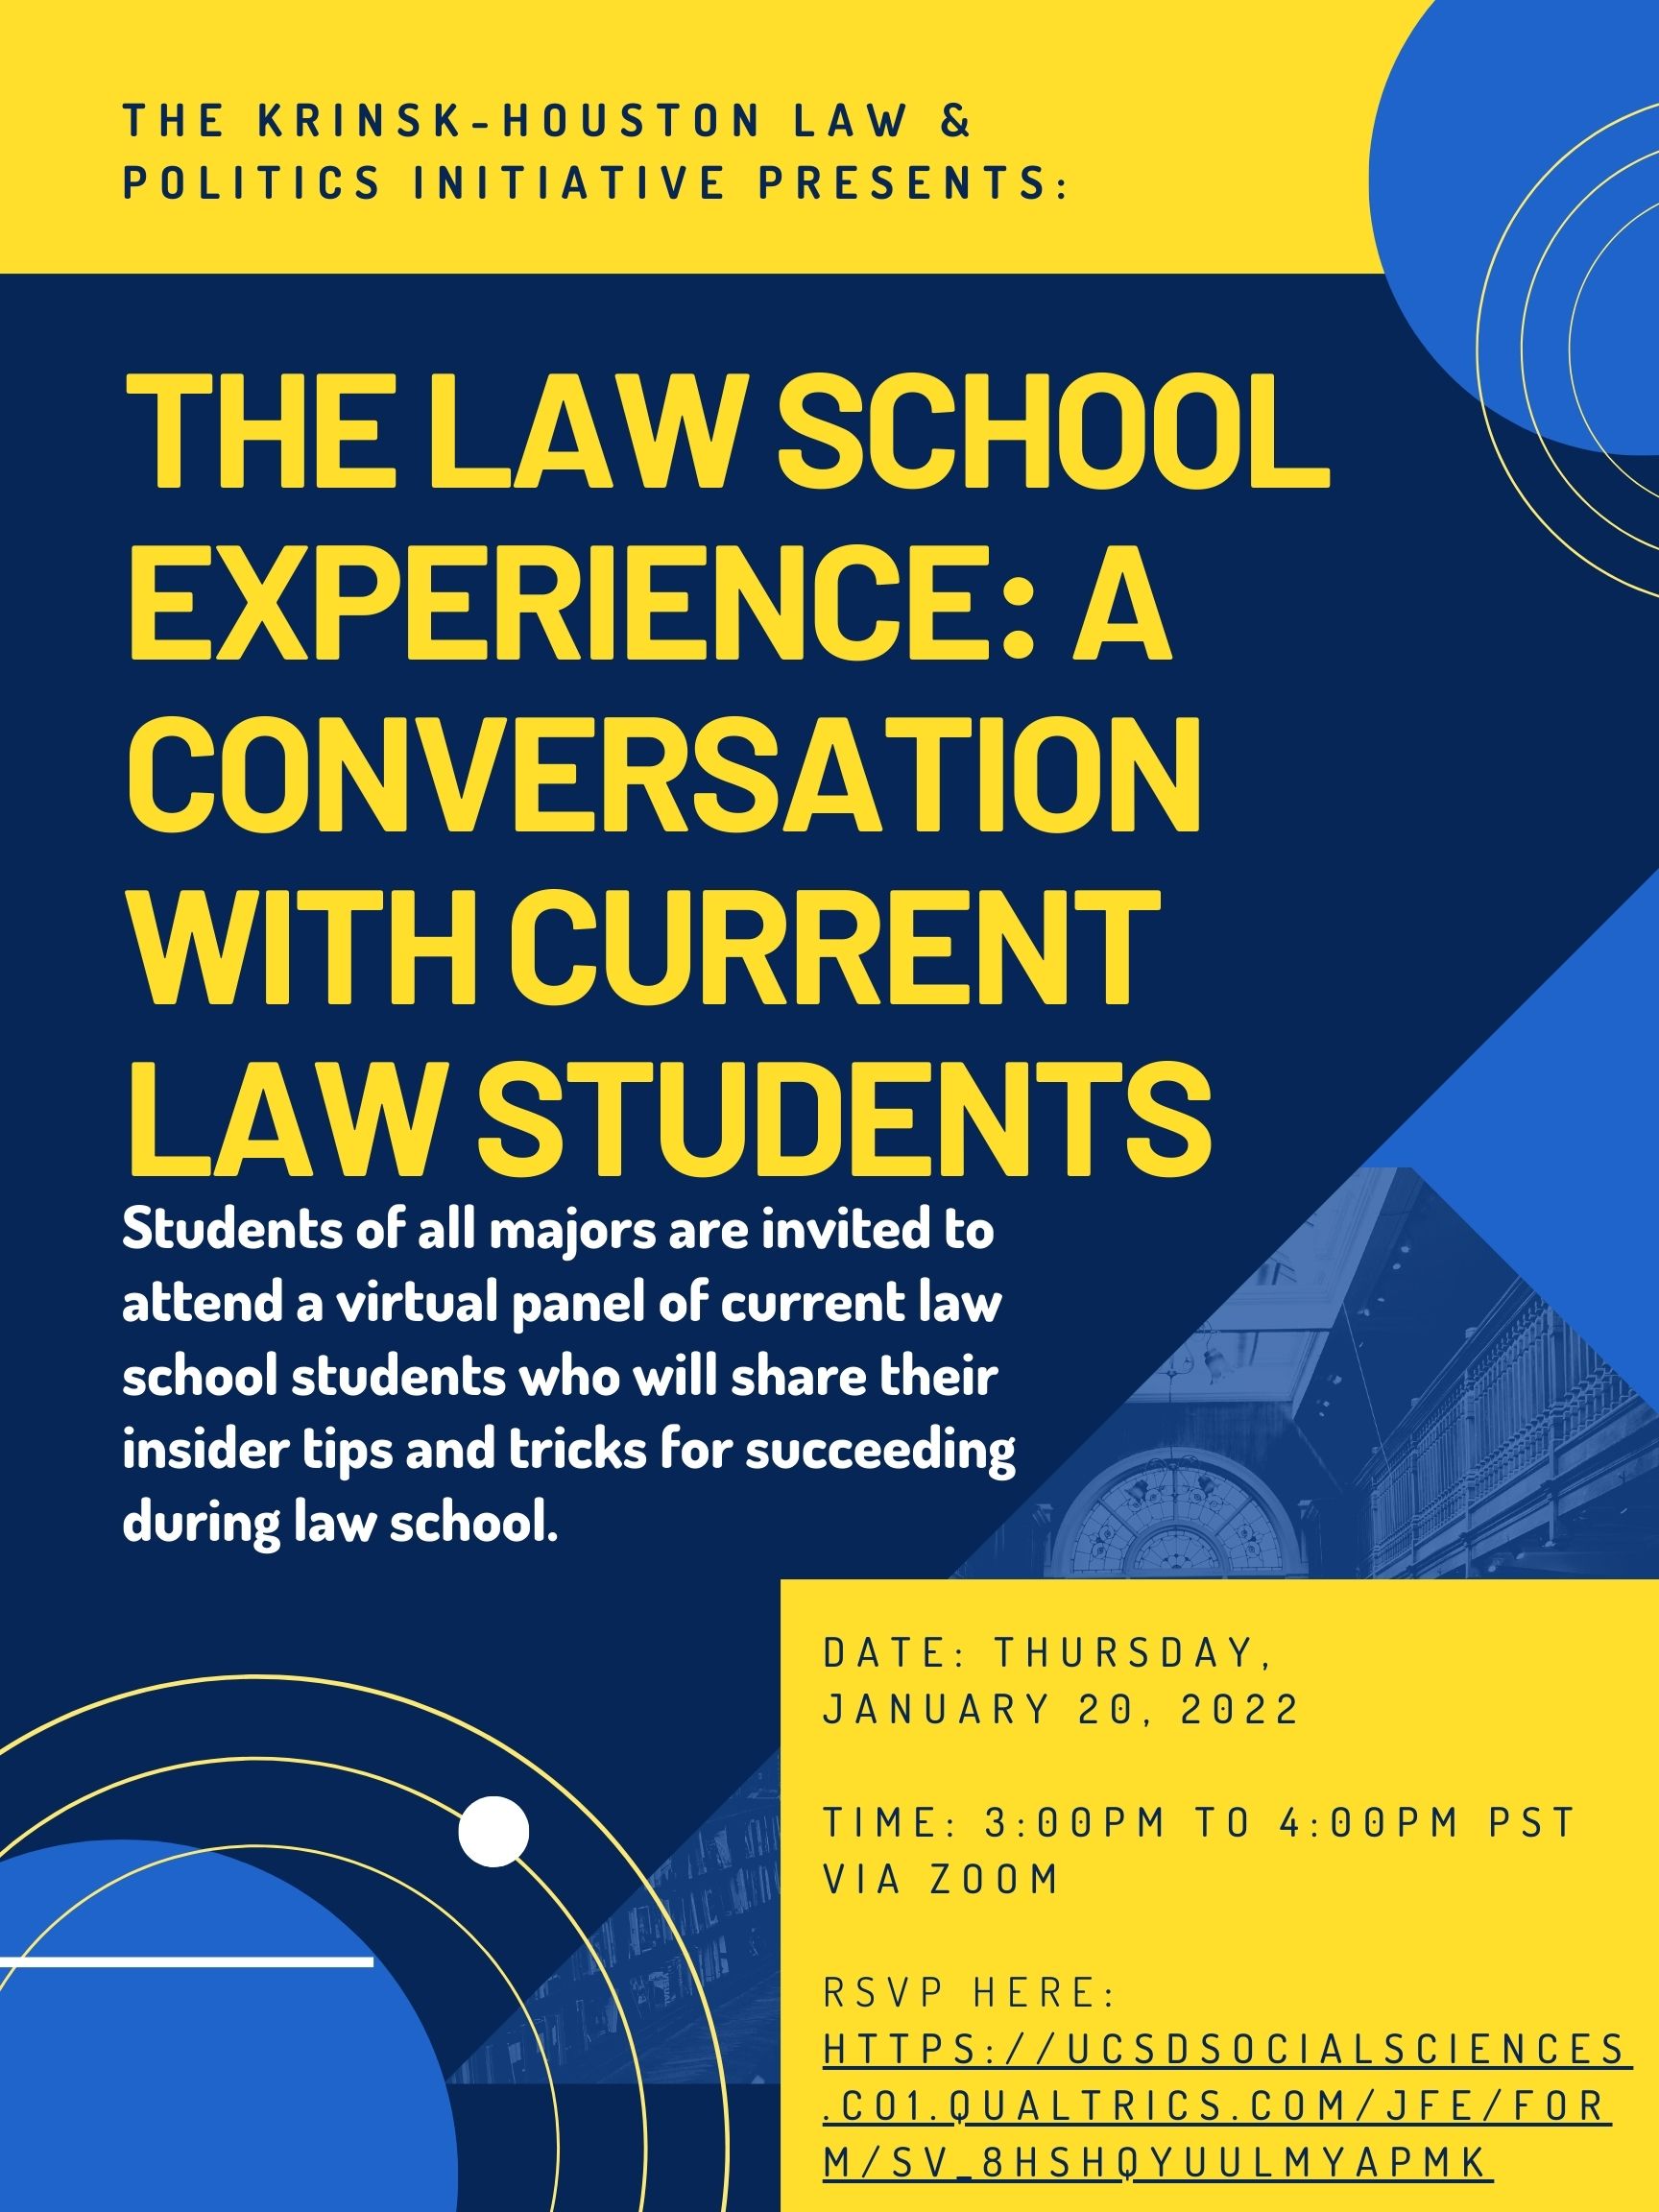 The-Law-School-Experience-A-Conversation-with-Current-Law-Students-1.jpg